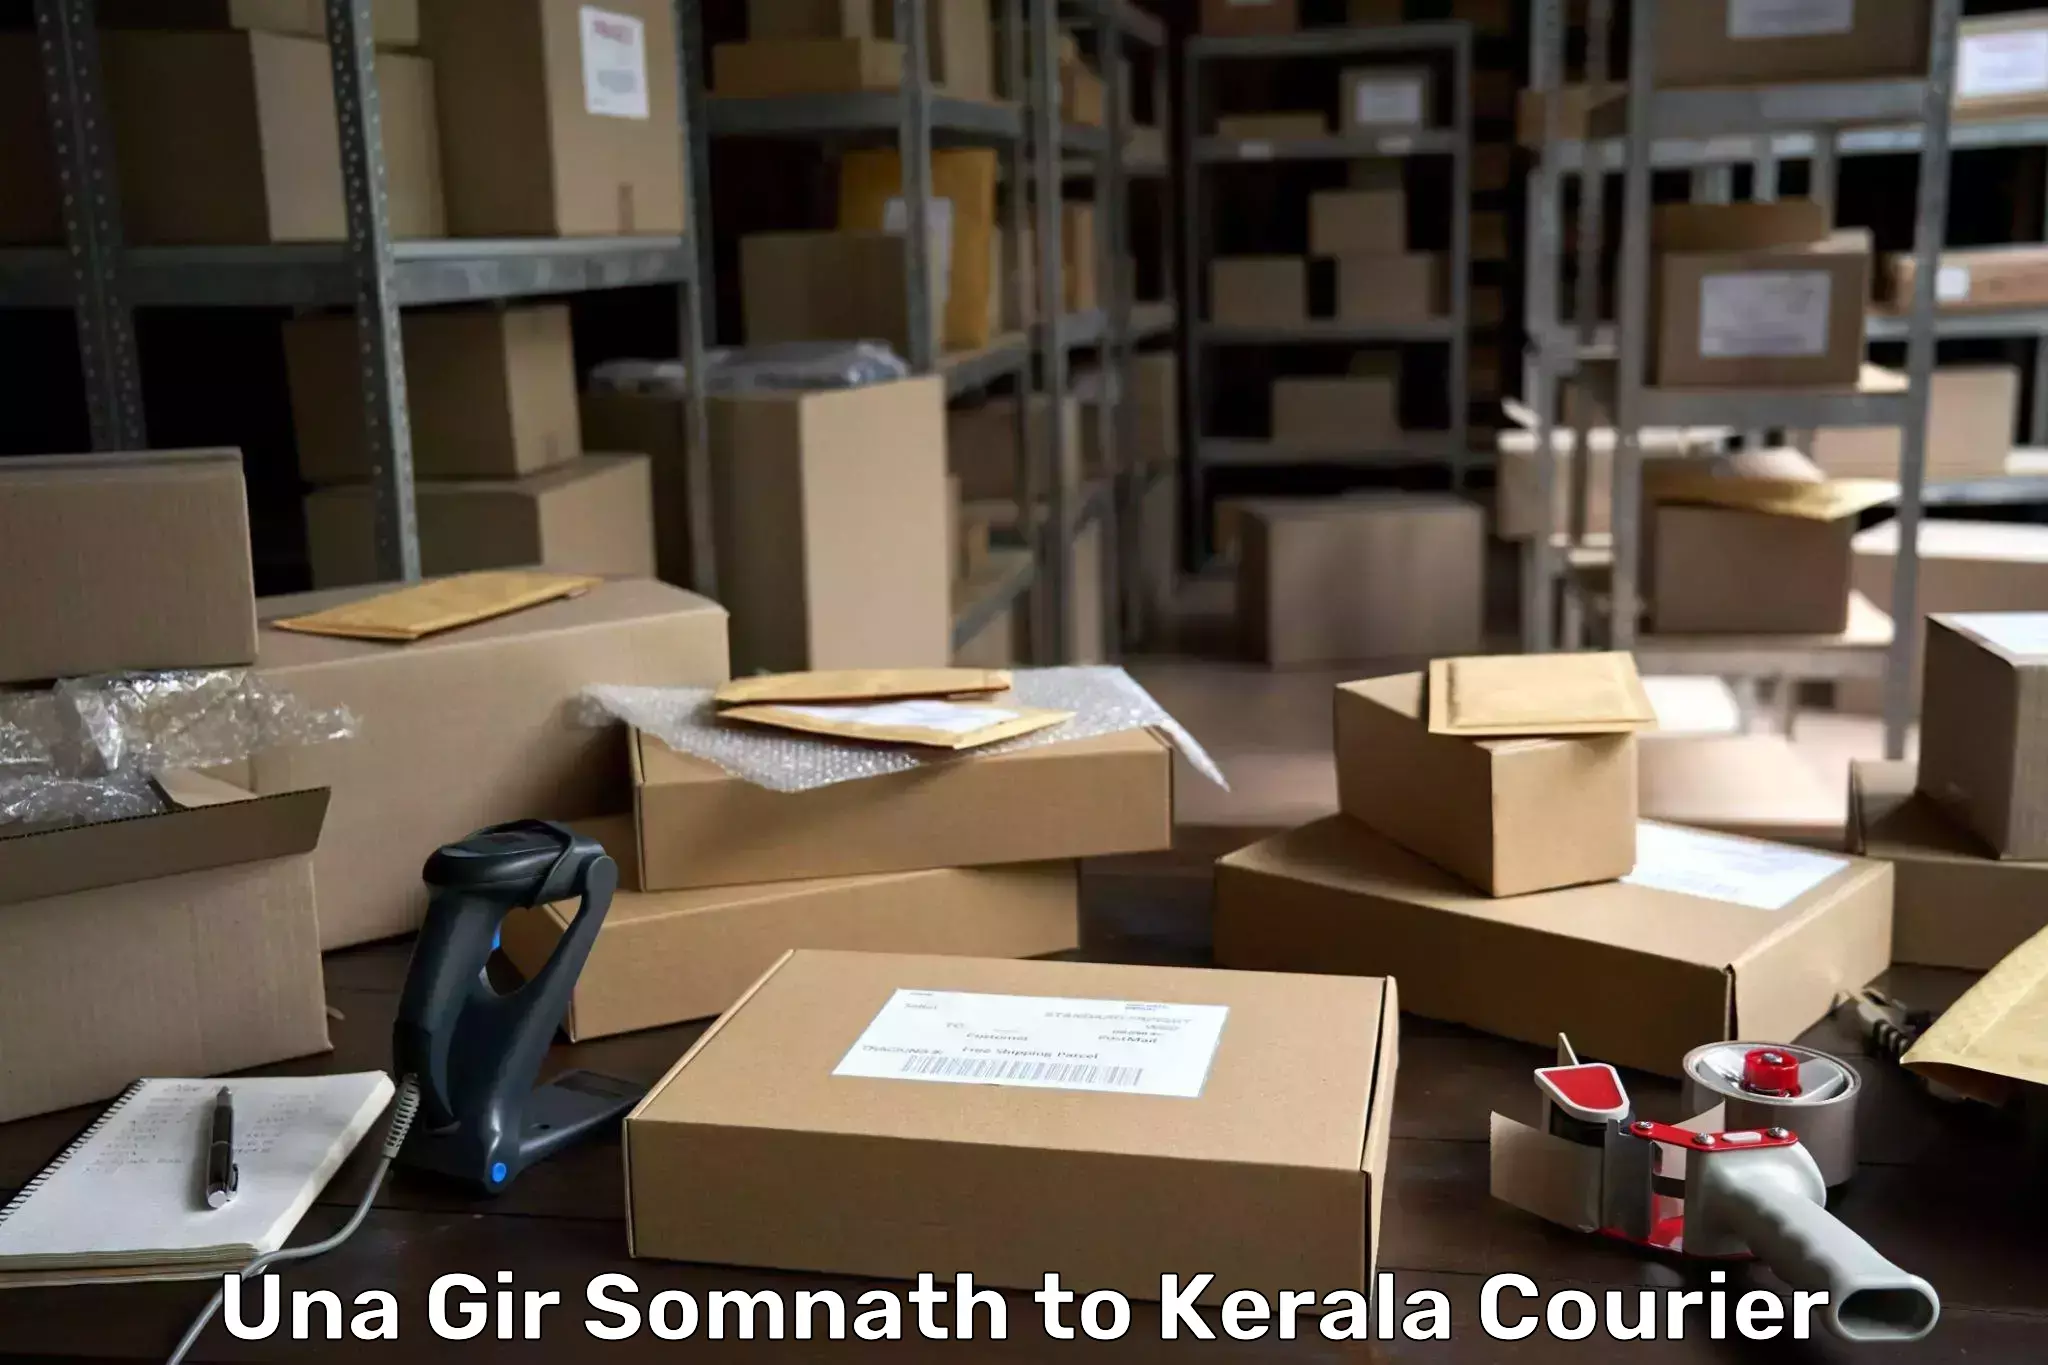 Customer-centric shipping in Una Gir Somnath to Perumbavoor